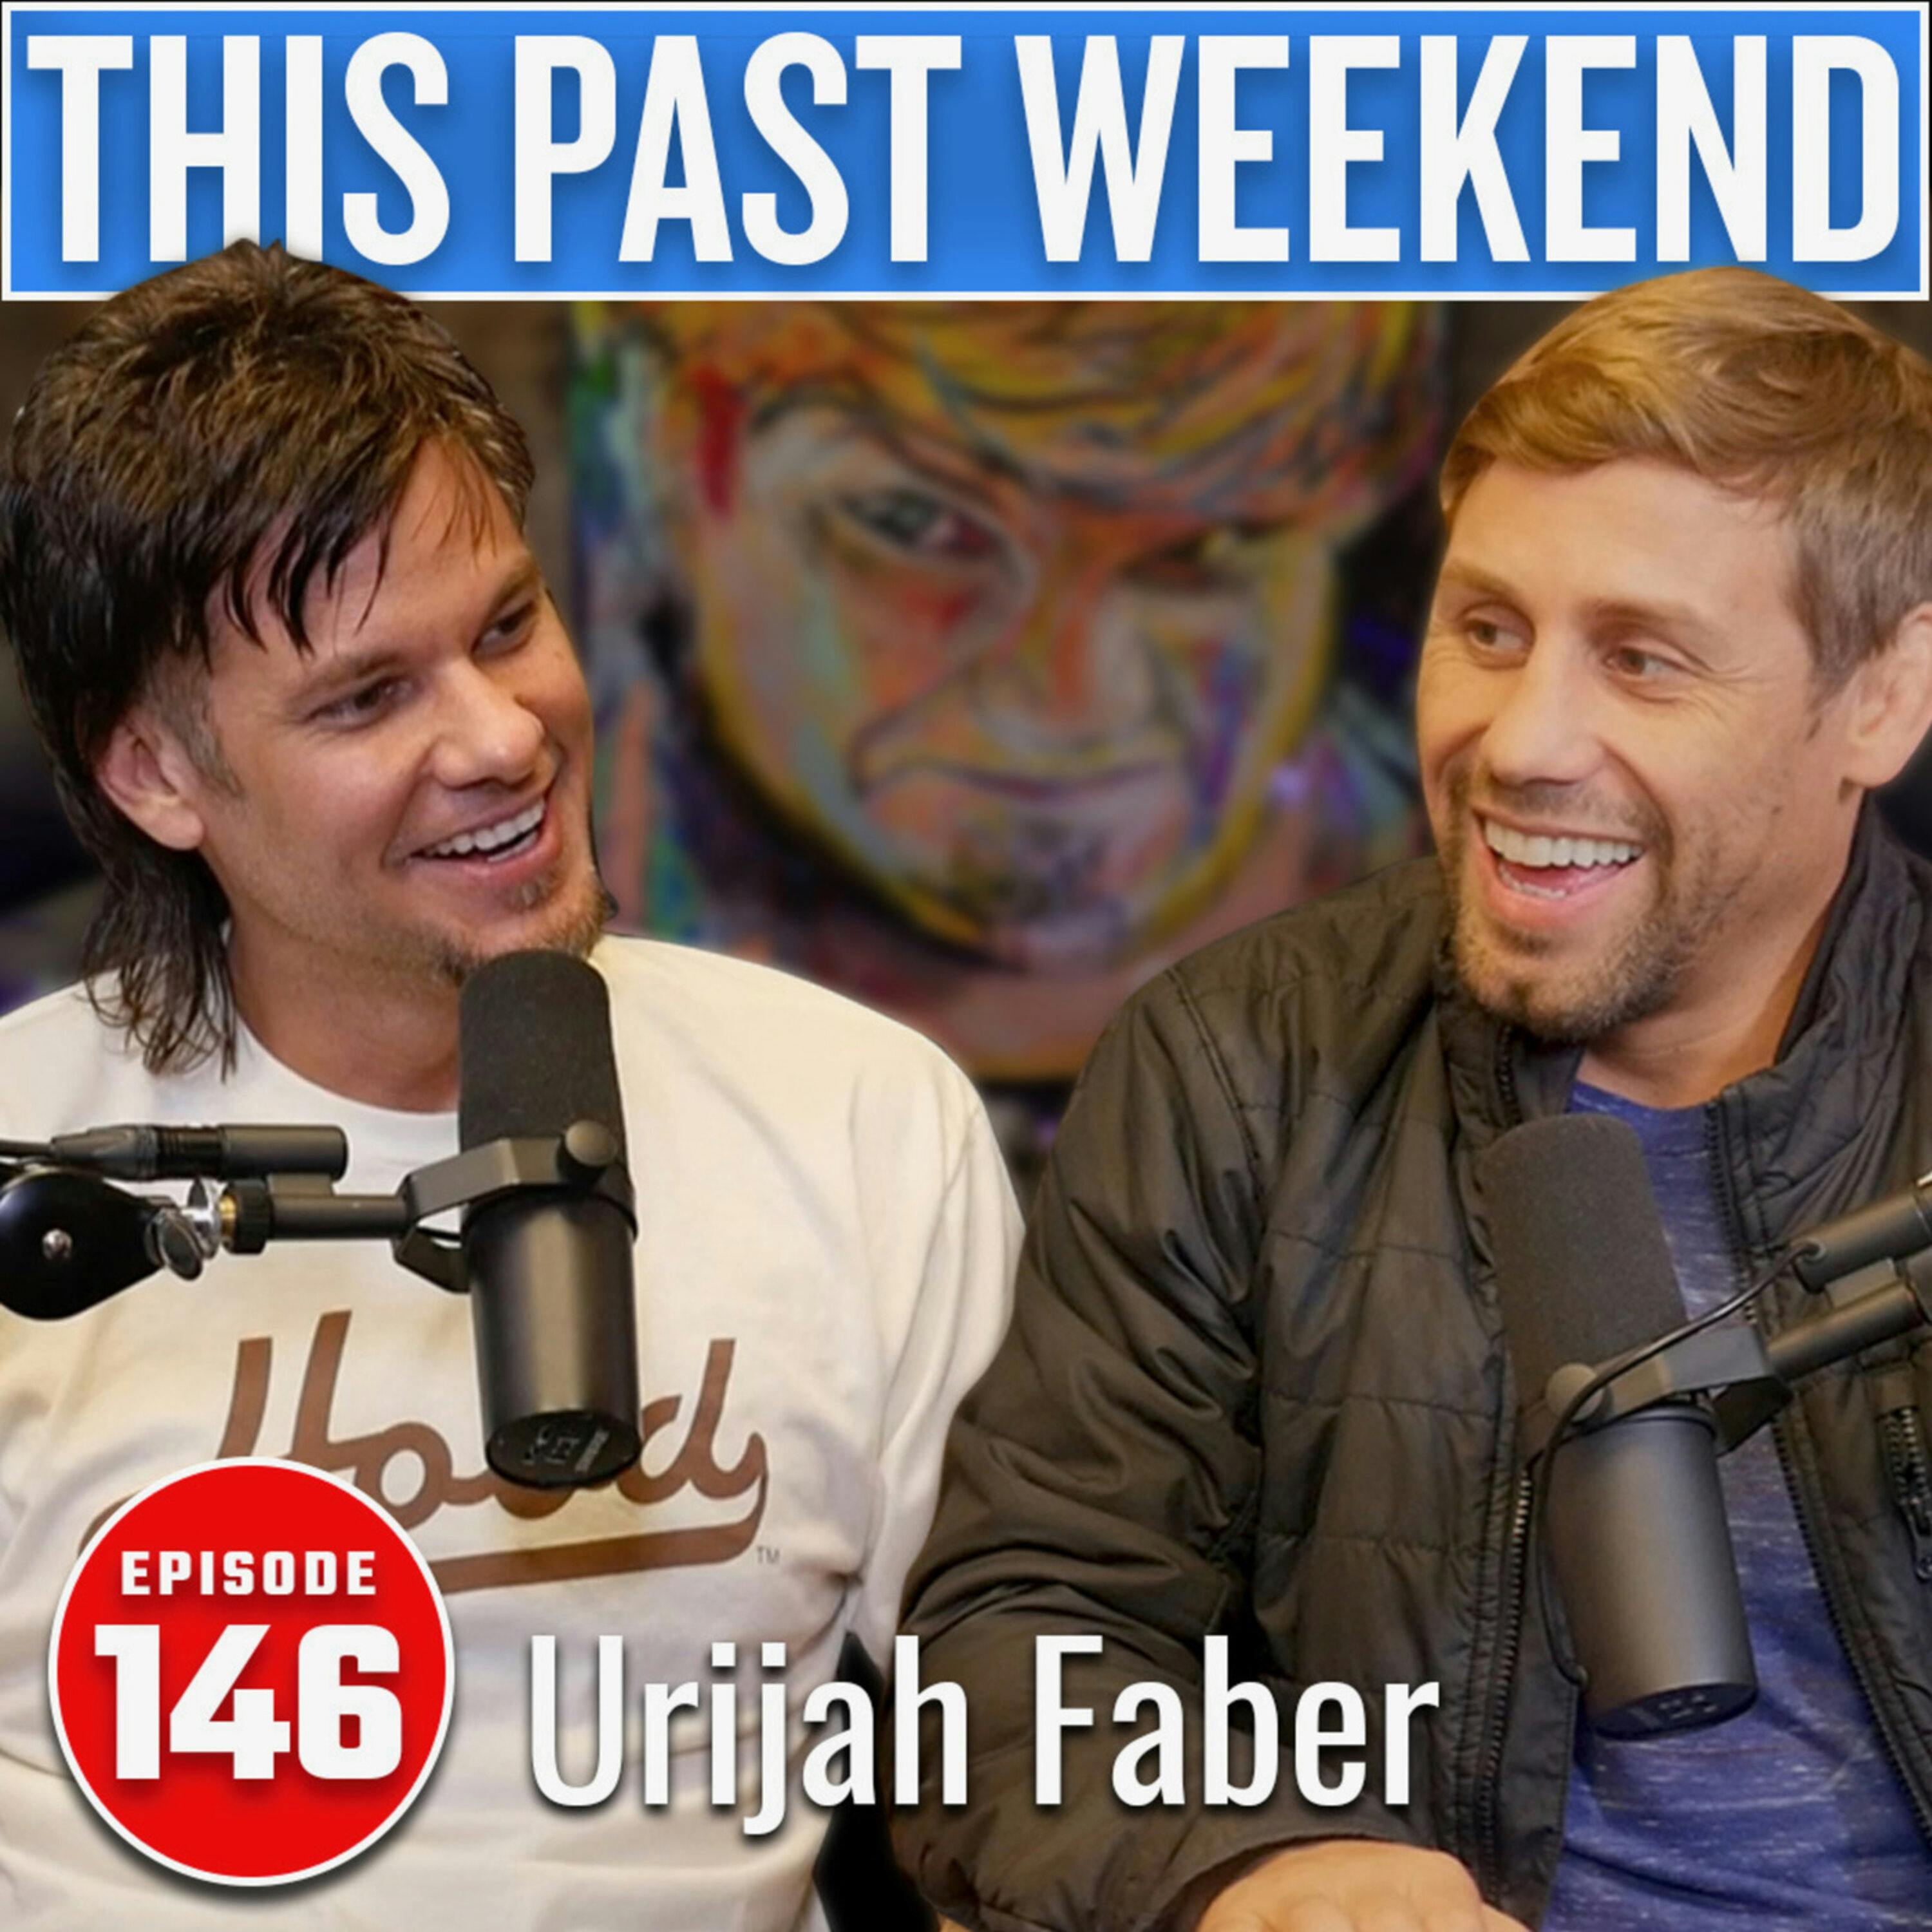 Urijah Faber | This Past Weekend #146 by Theo Von